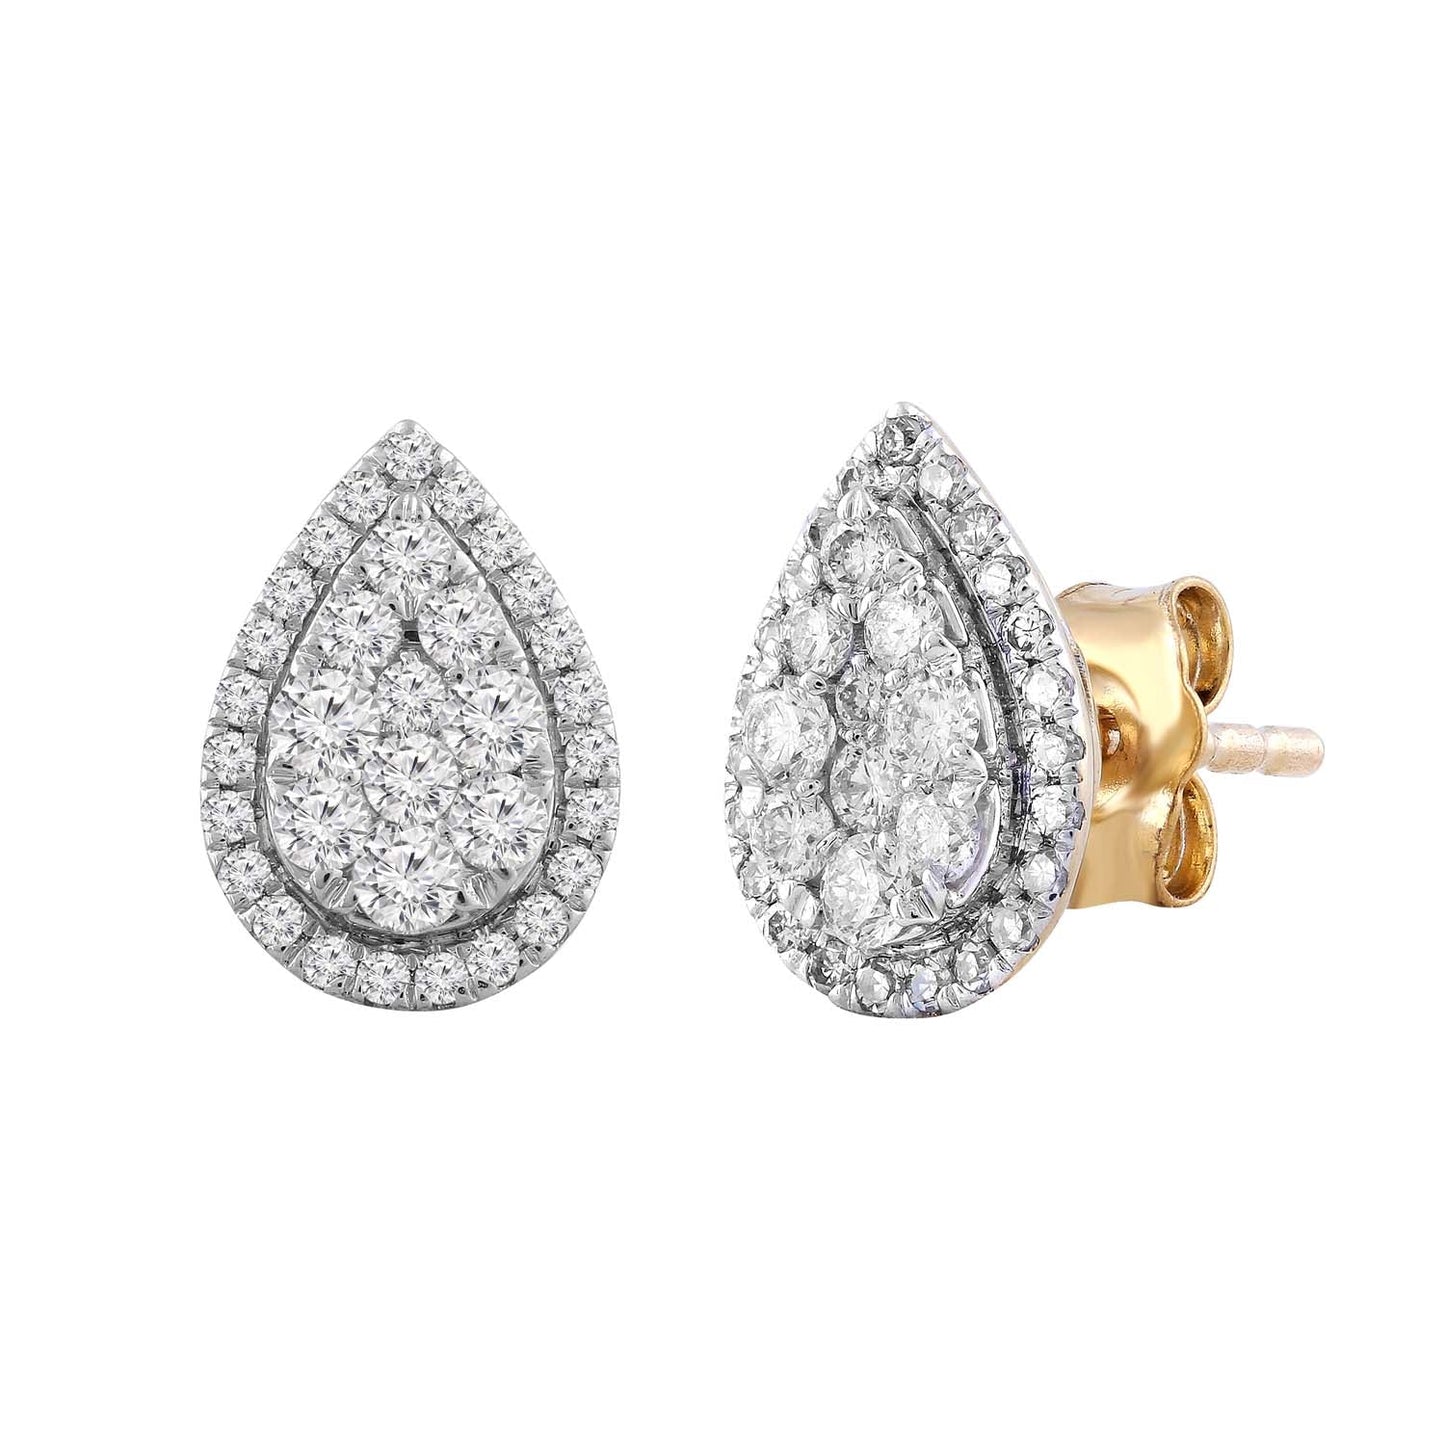 Pear Stud Earrings with 0.50ct Diamond in 9K Yellow Gold